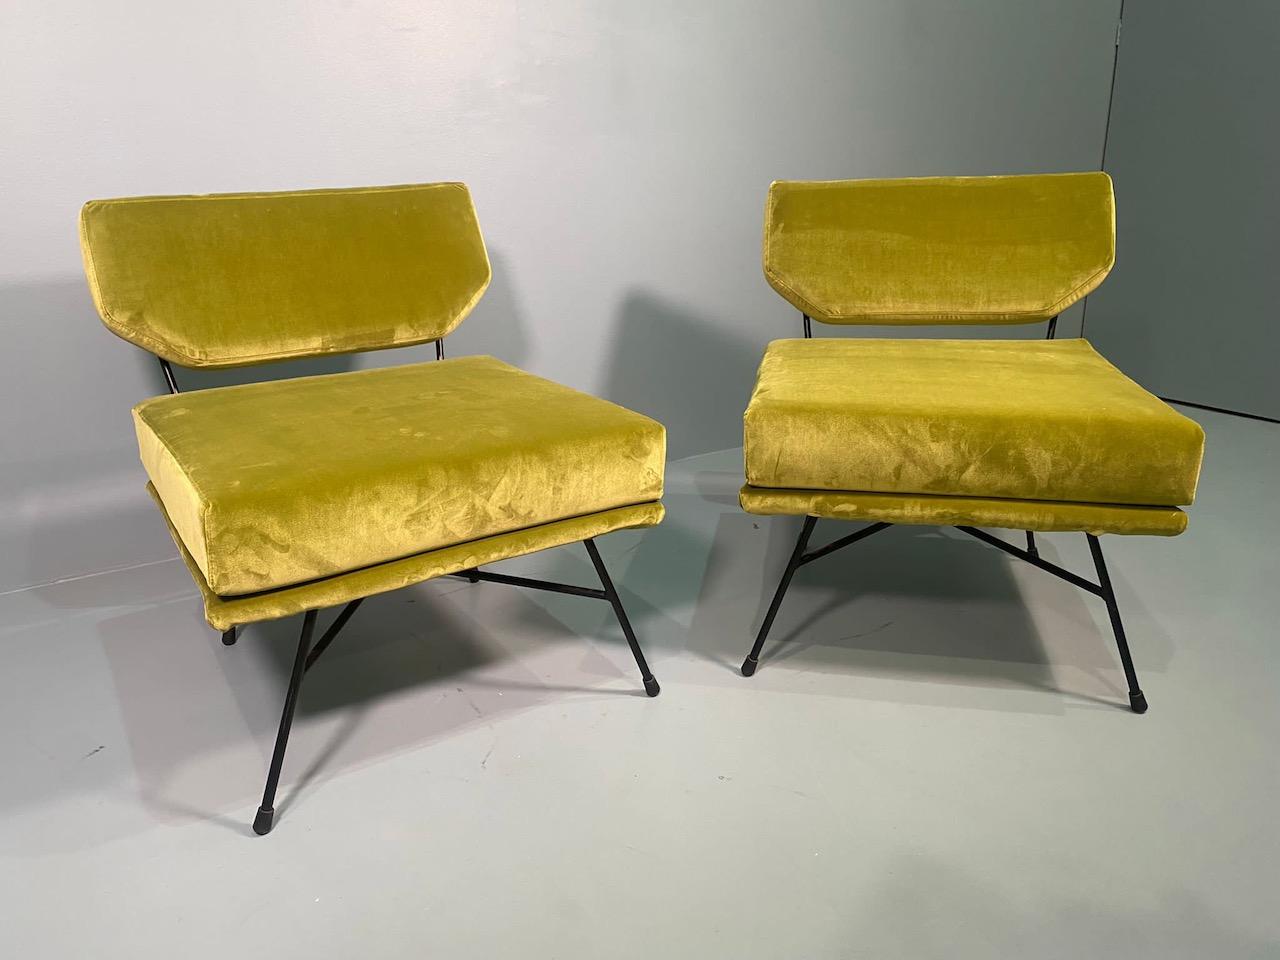 20th Century Pair of 'Elettra' Lounge Chairs by BBPR, Arflex, Italy 1953, Compasso D'Oro 1954 For Sale